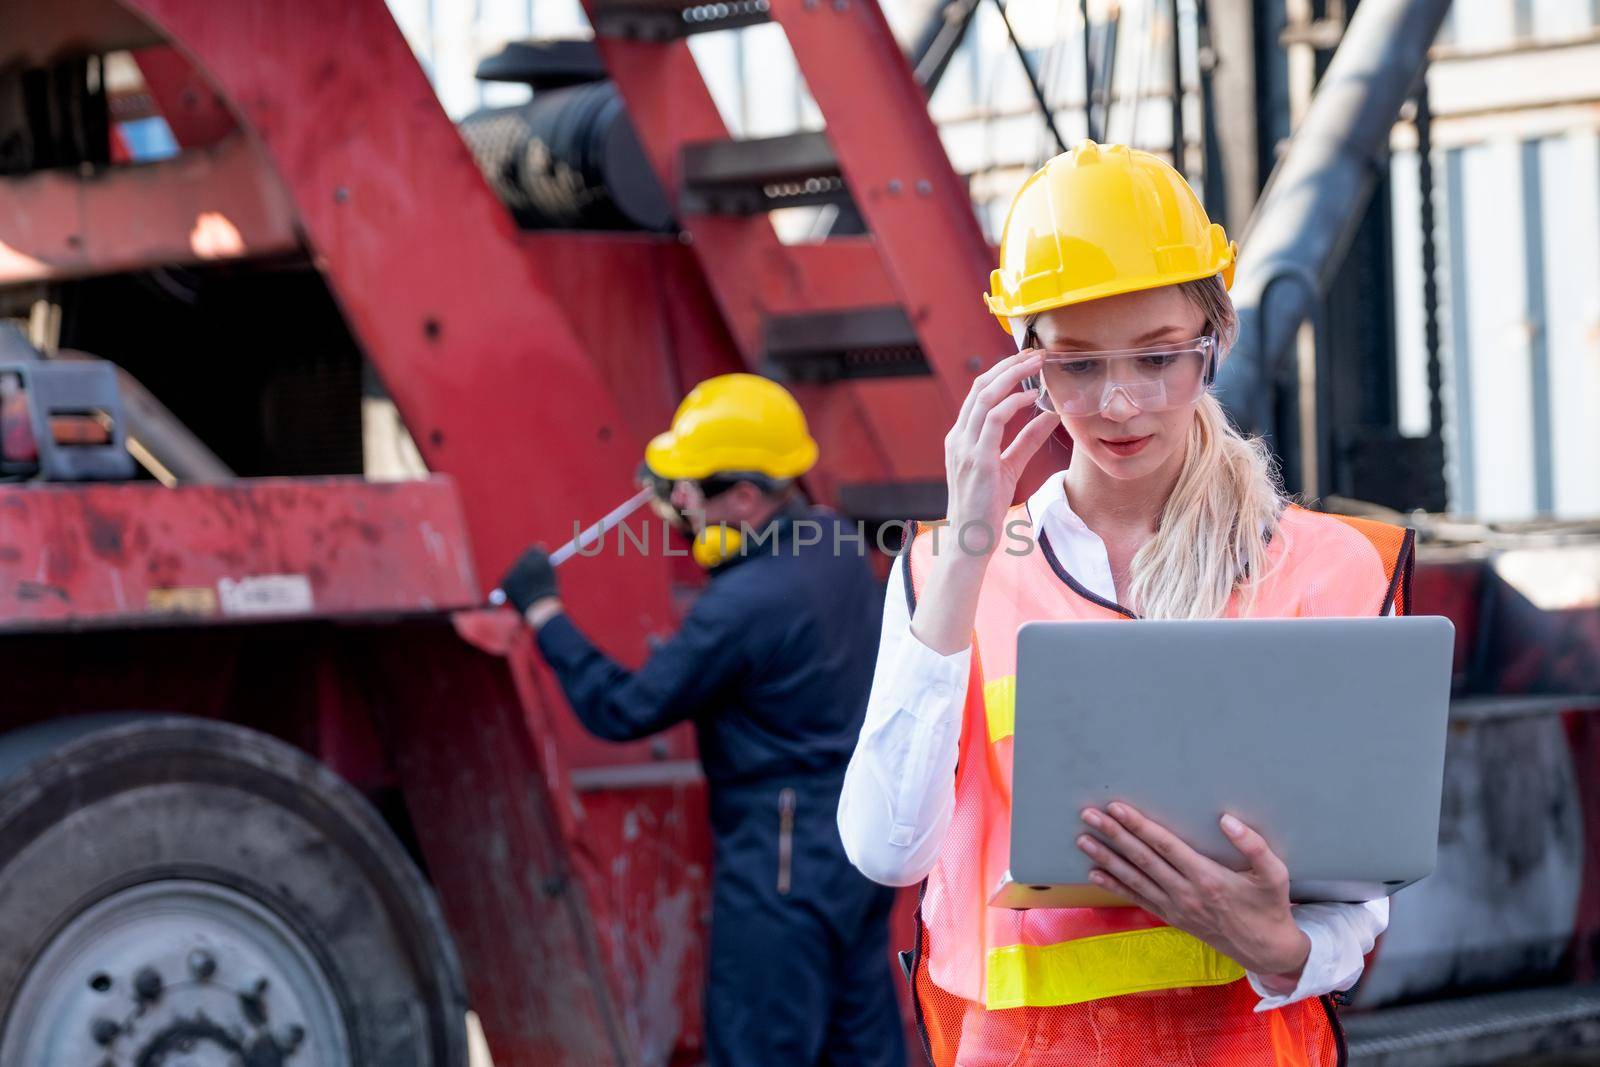 Pretty foreman woman or worker stand with touch her safety eye glasses and holding laptop for working in front of her co-worker fix the problem of vehicle in background of cargo container workplace. by nrradmin